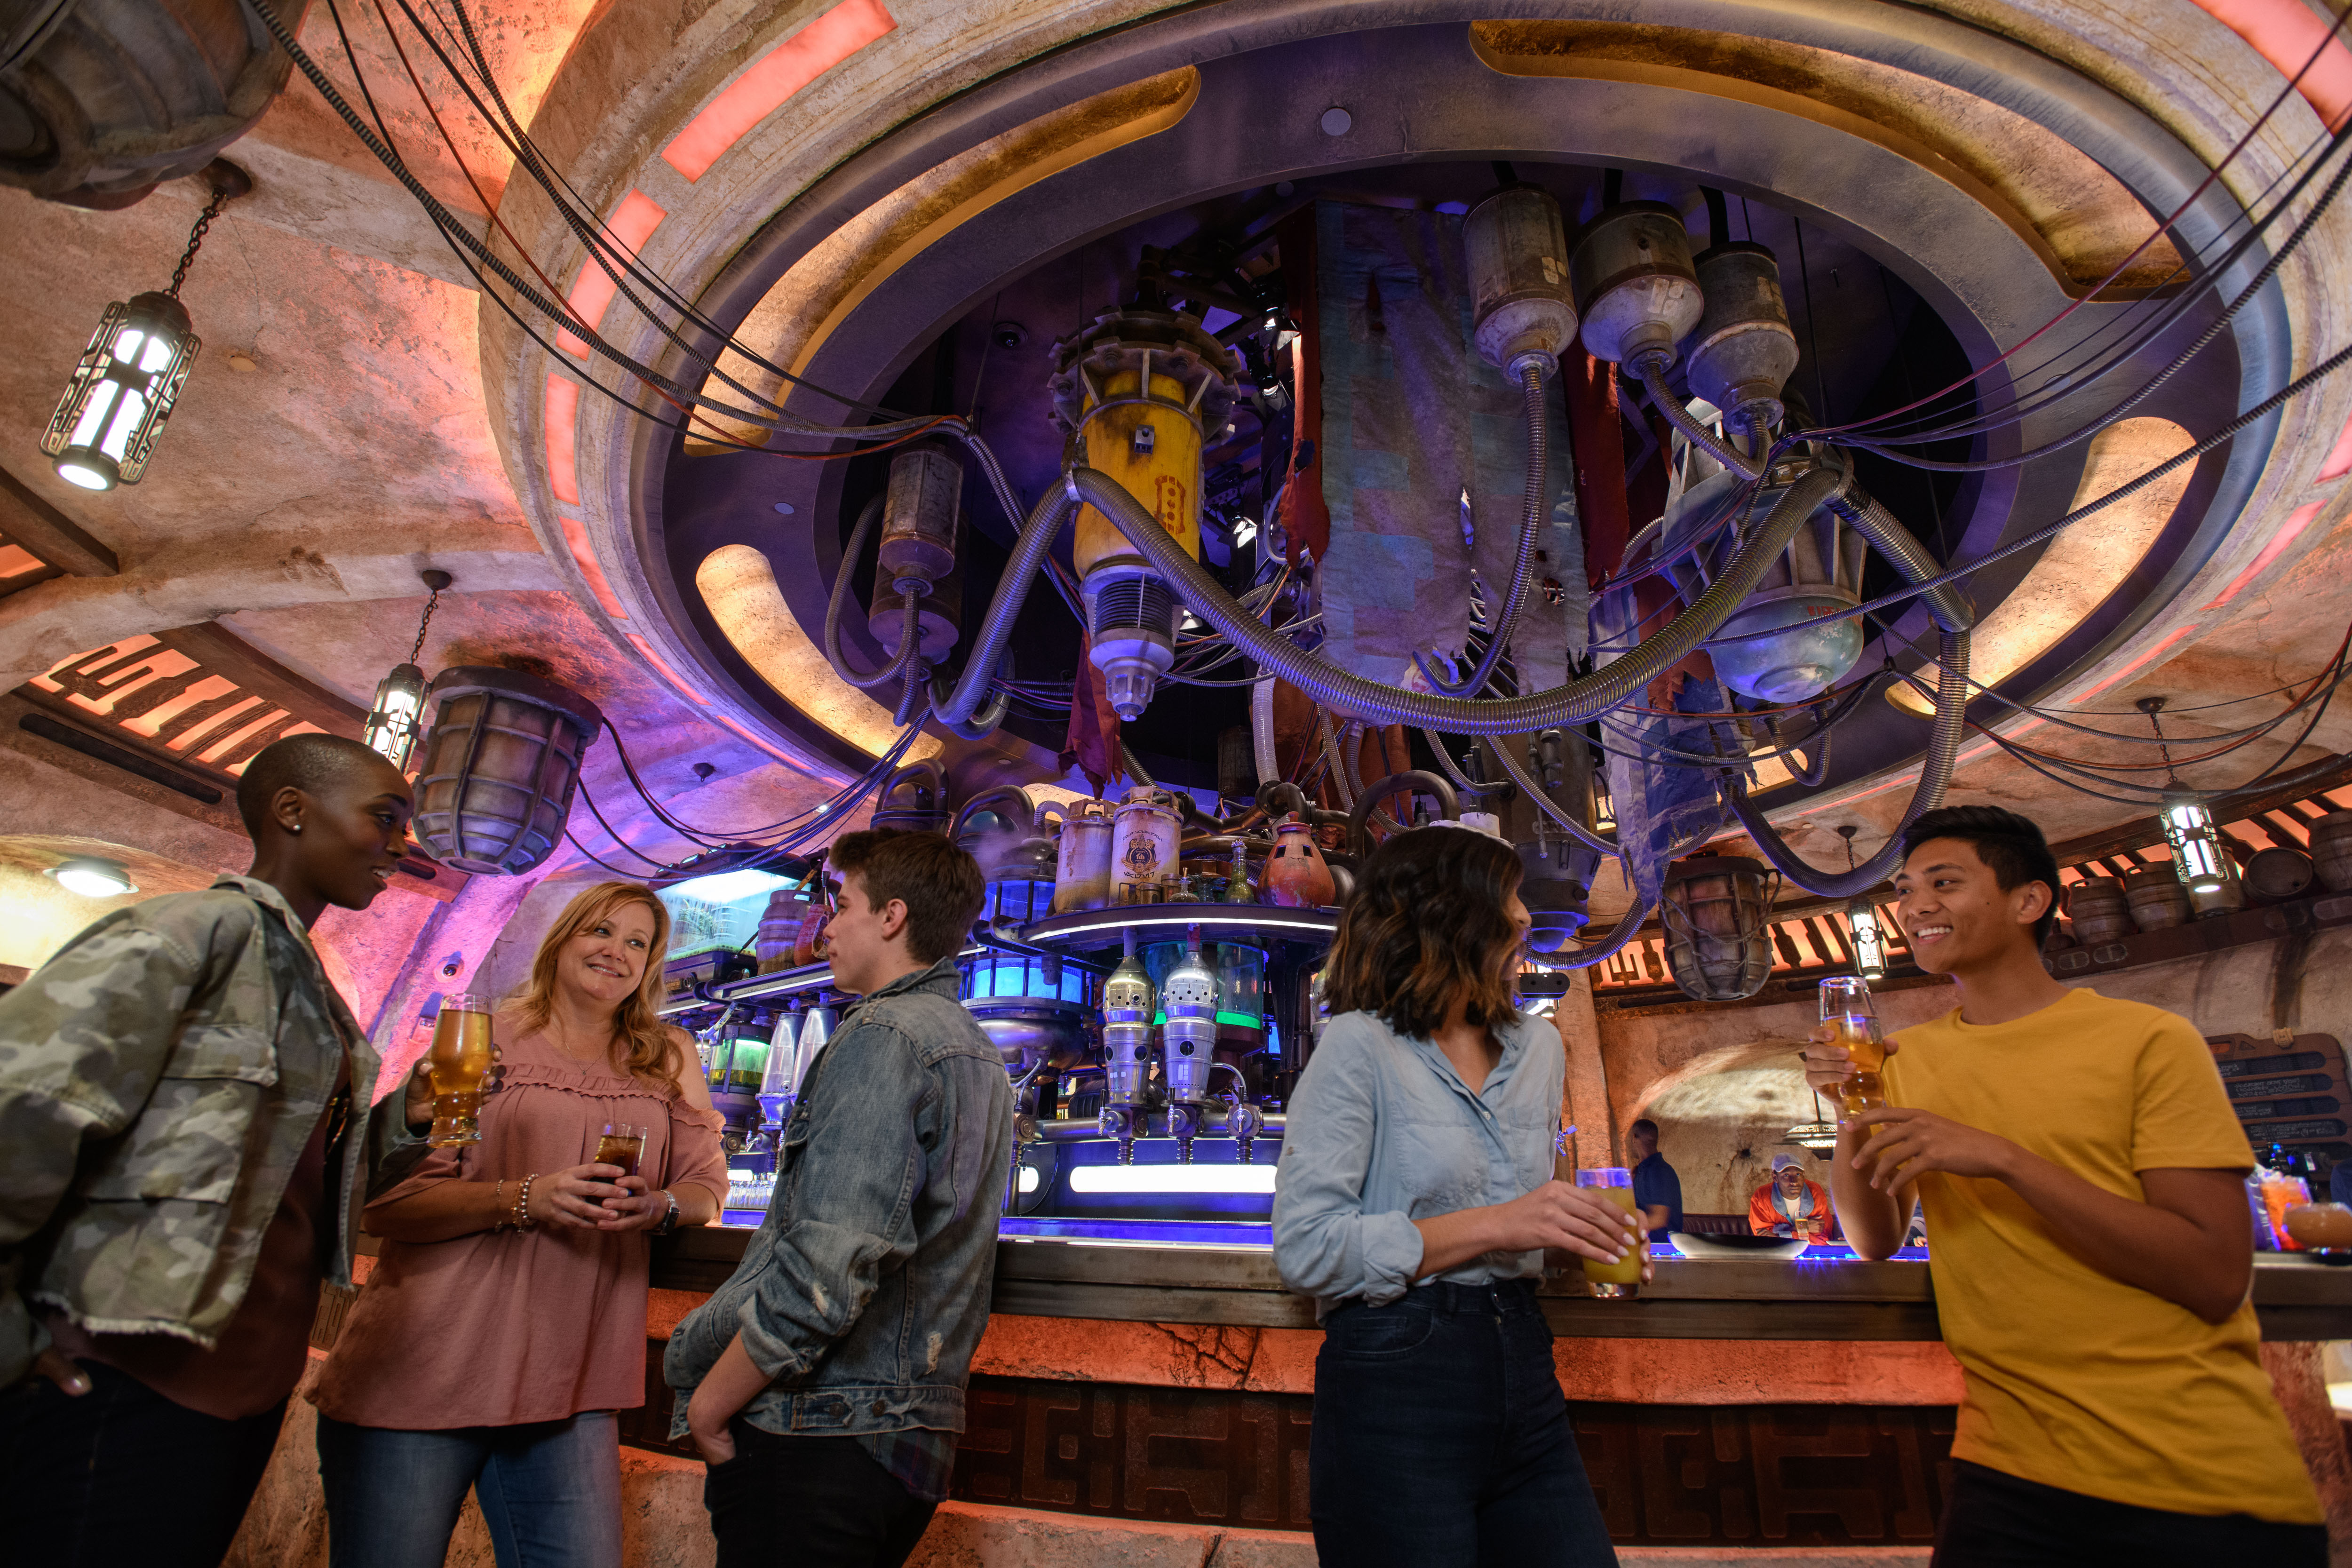 Join Us For Drinks At Olga’s Cantina In Star Wars: Galaxy’s Edge